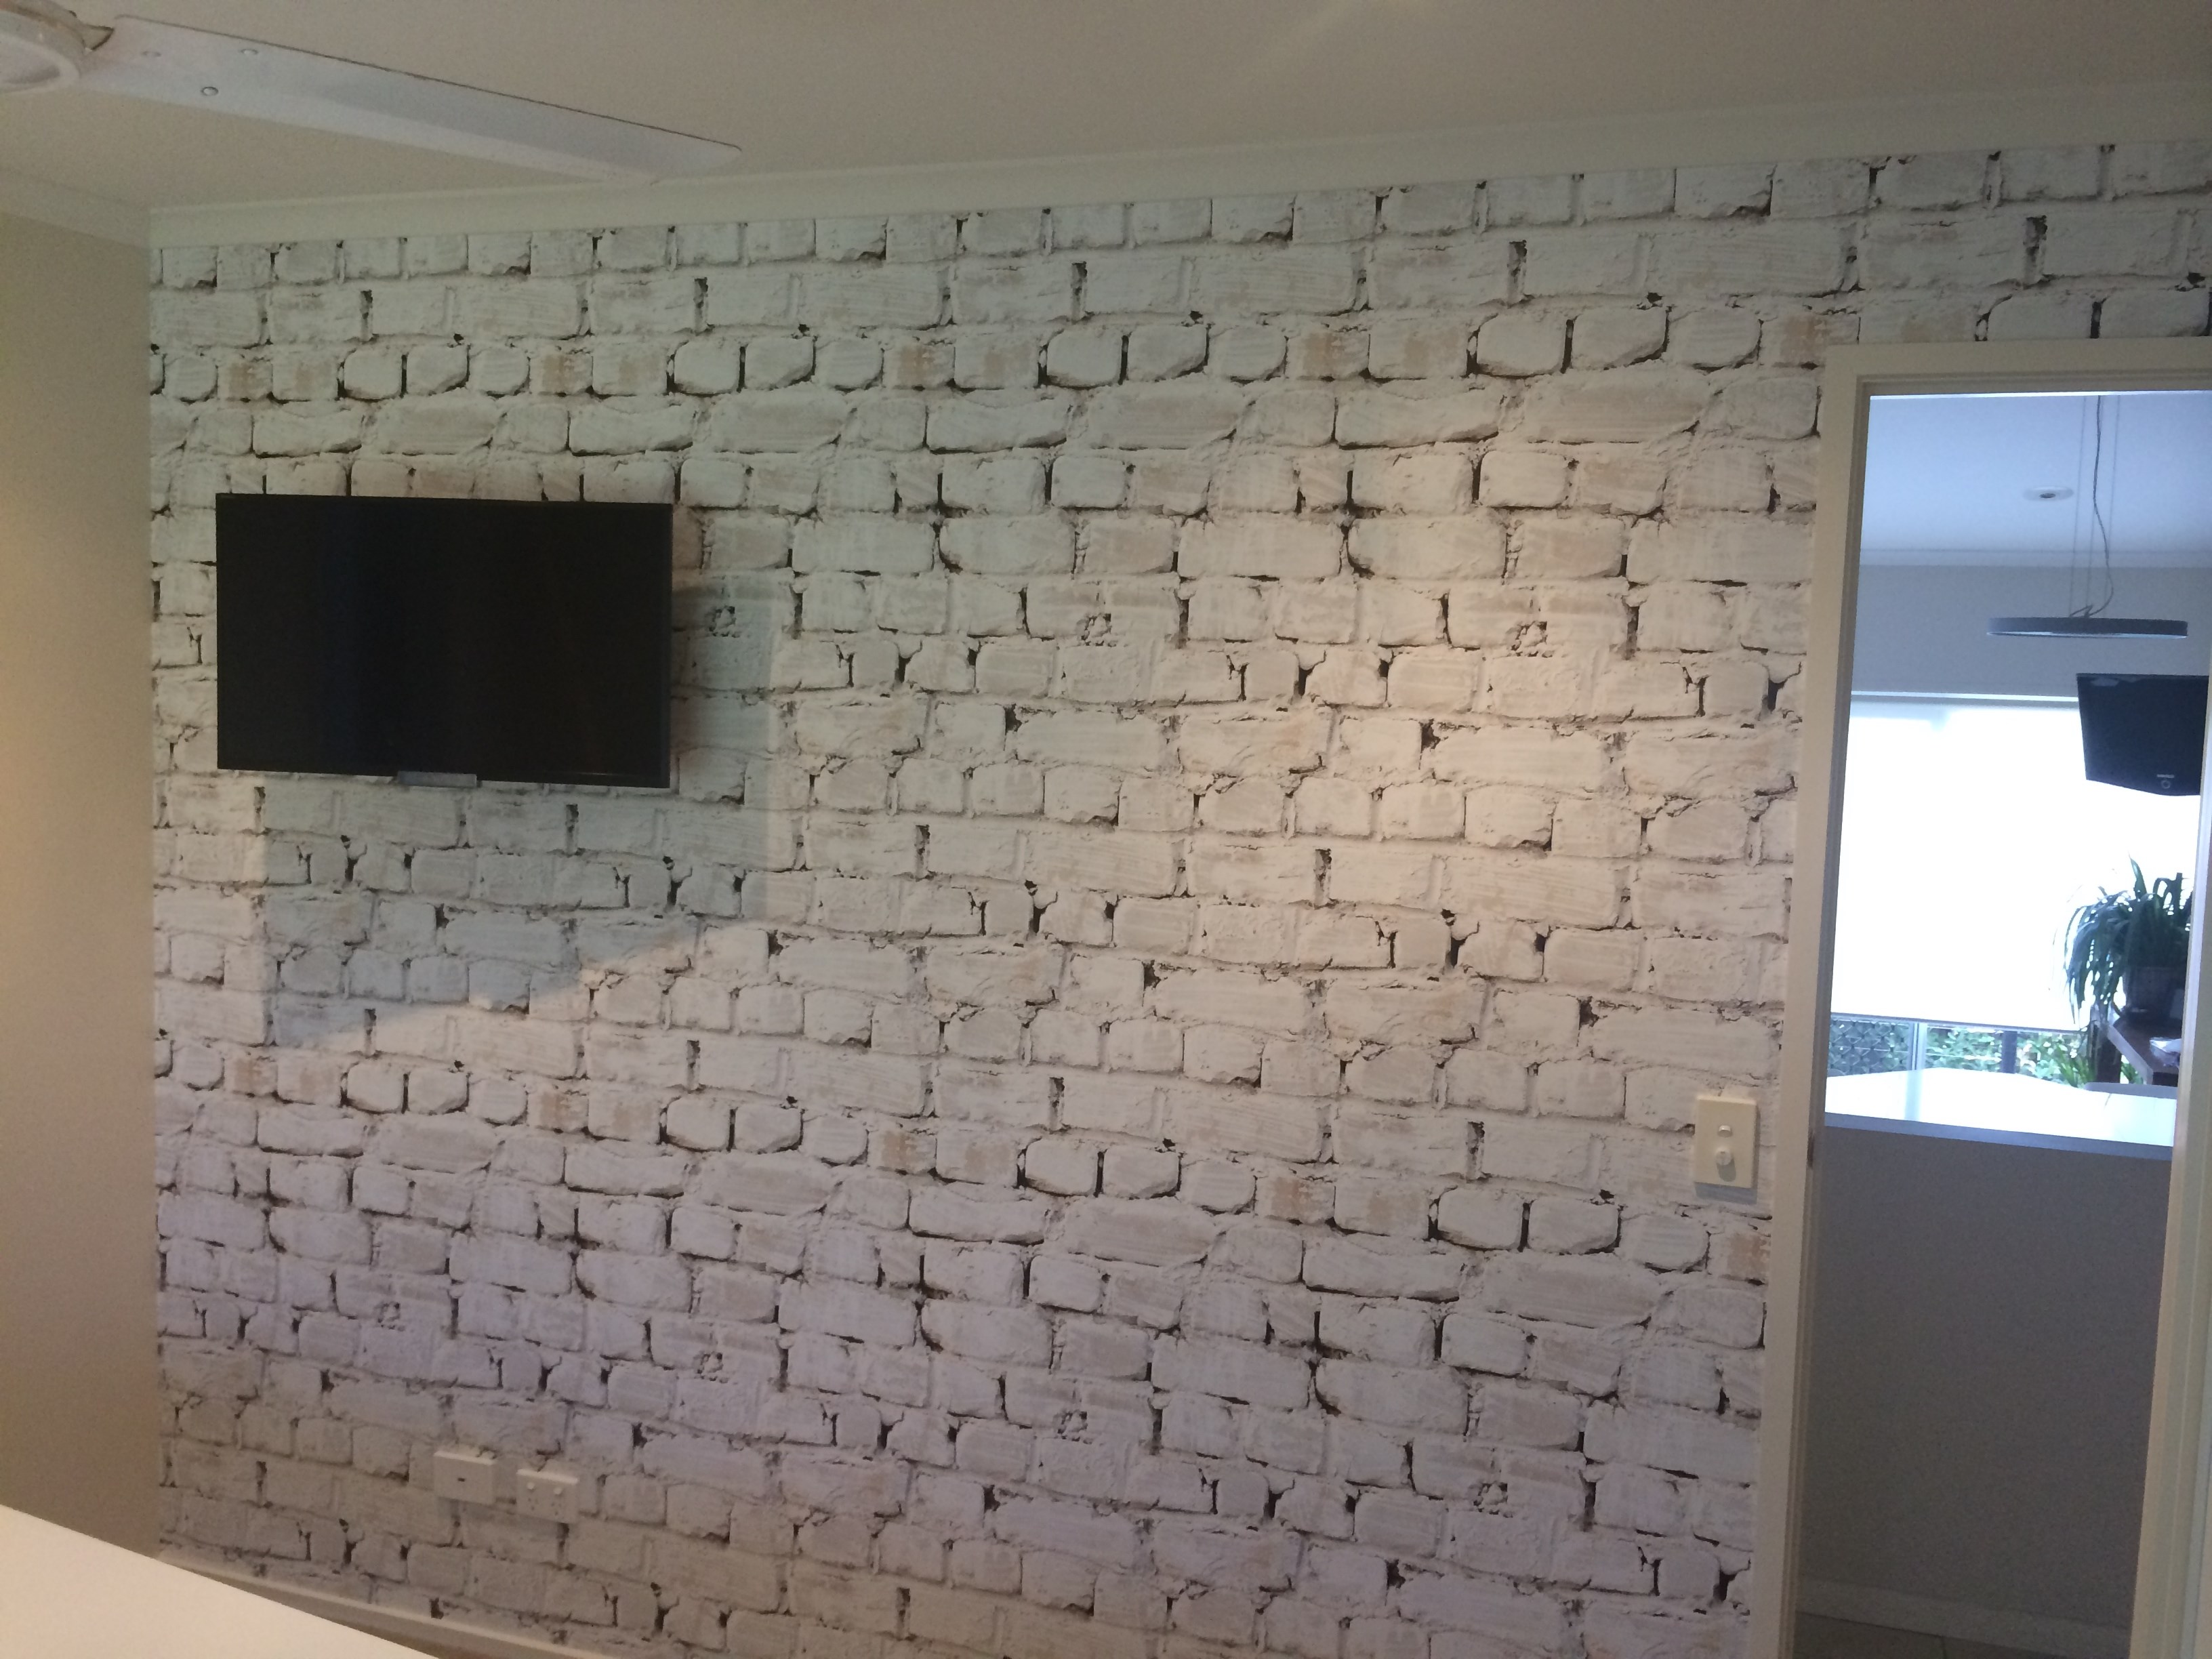 Brick Wallpaper Takes Wallcoverings To Another Level